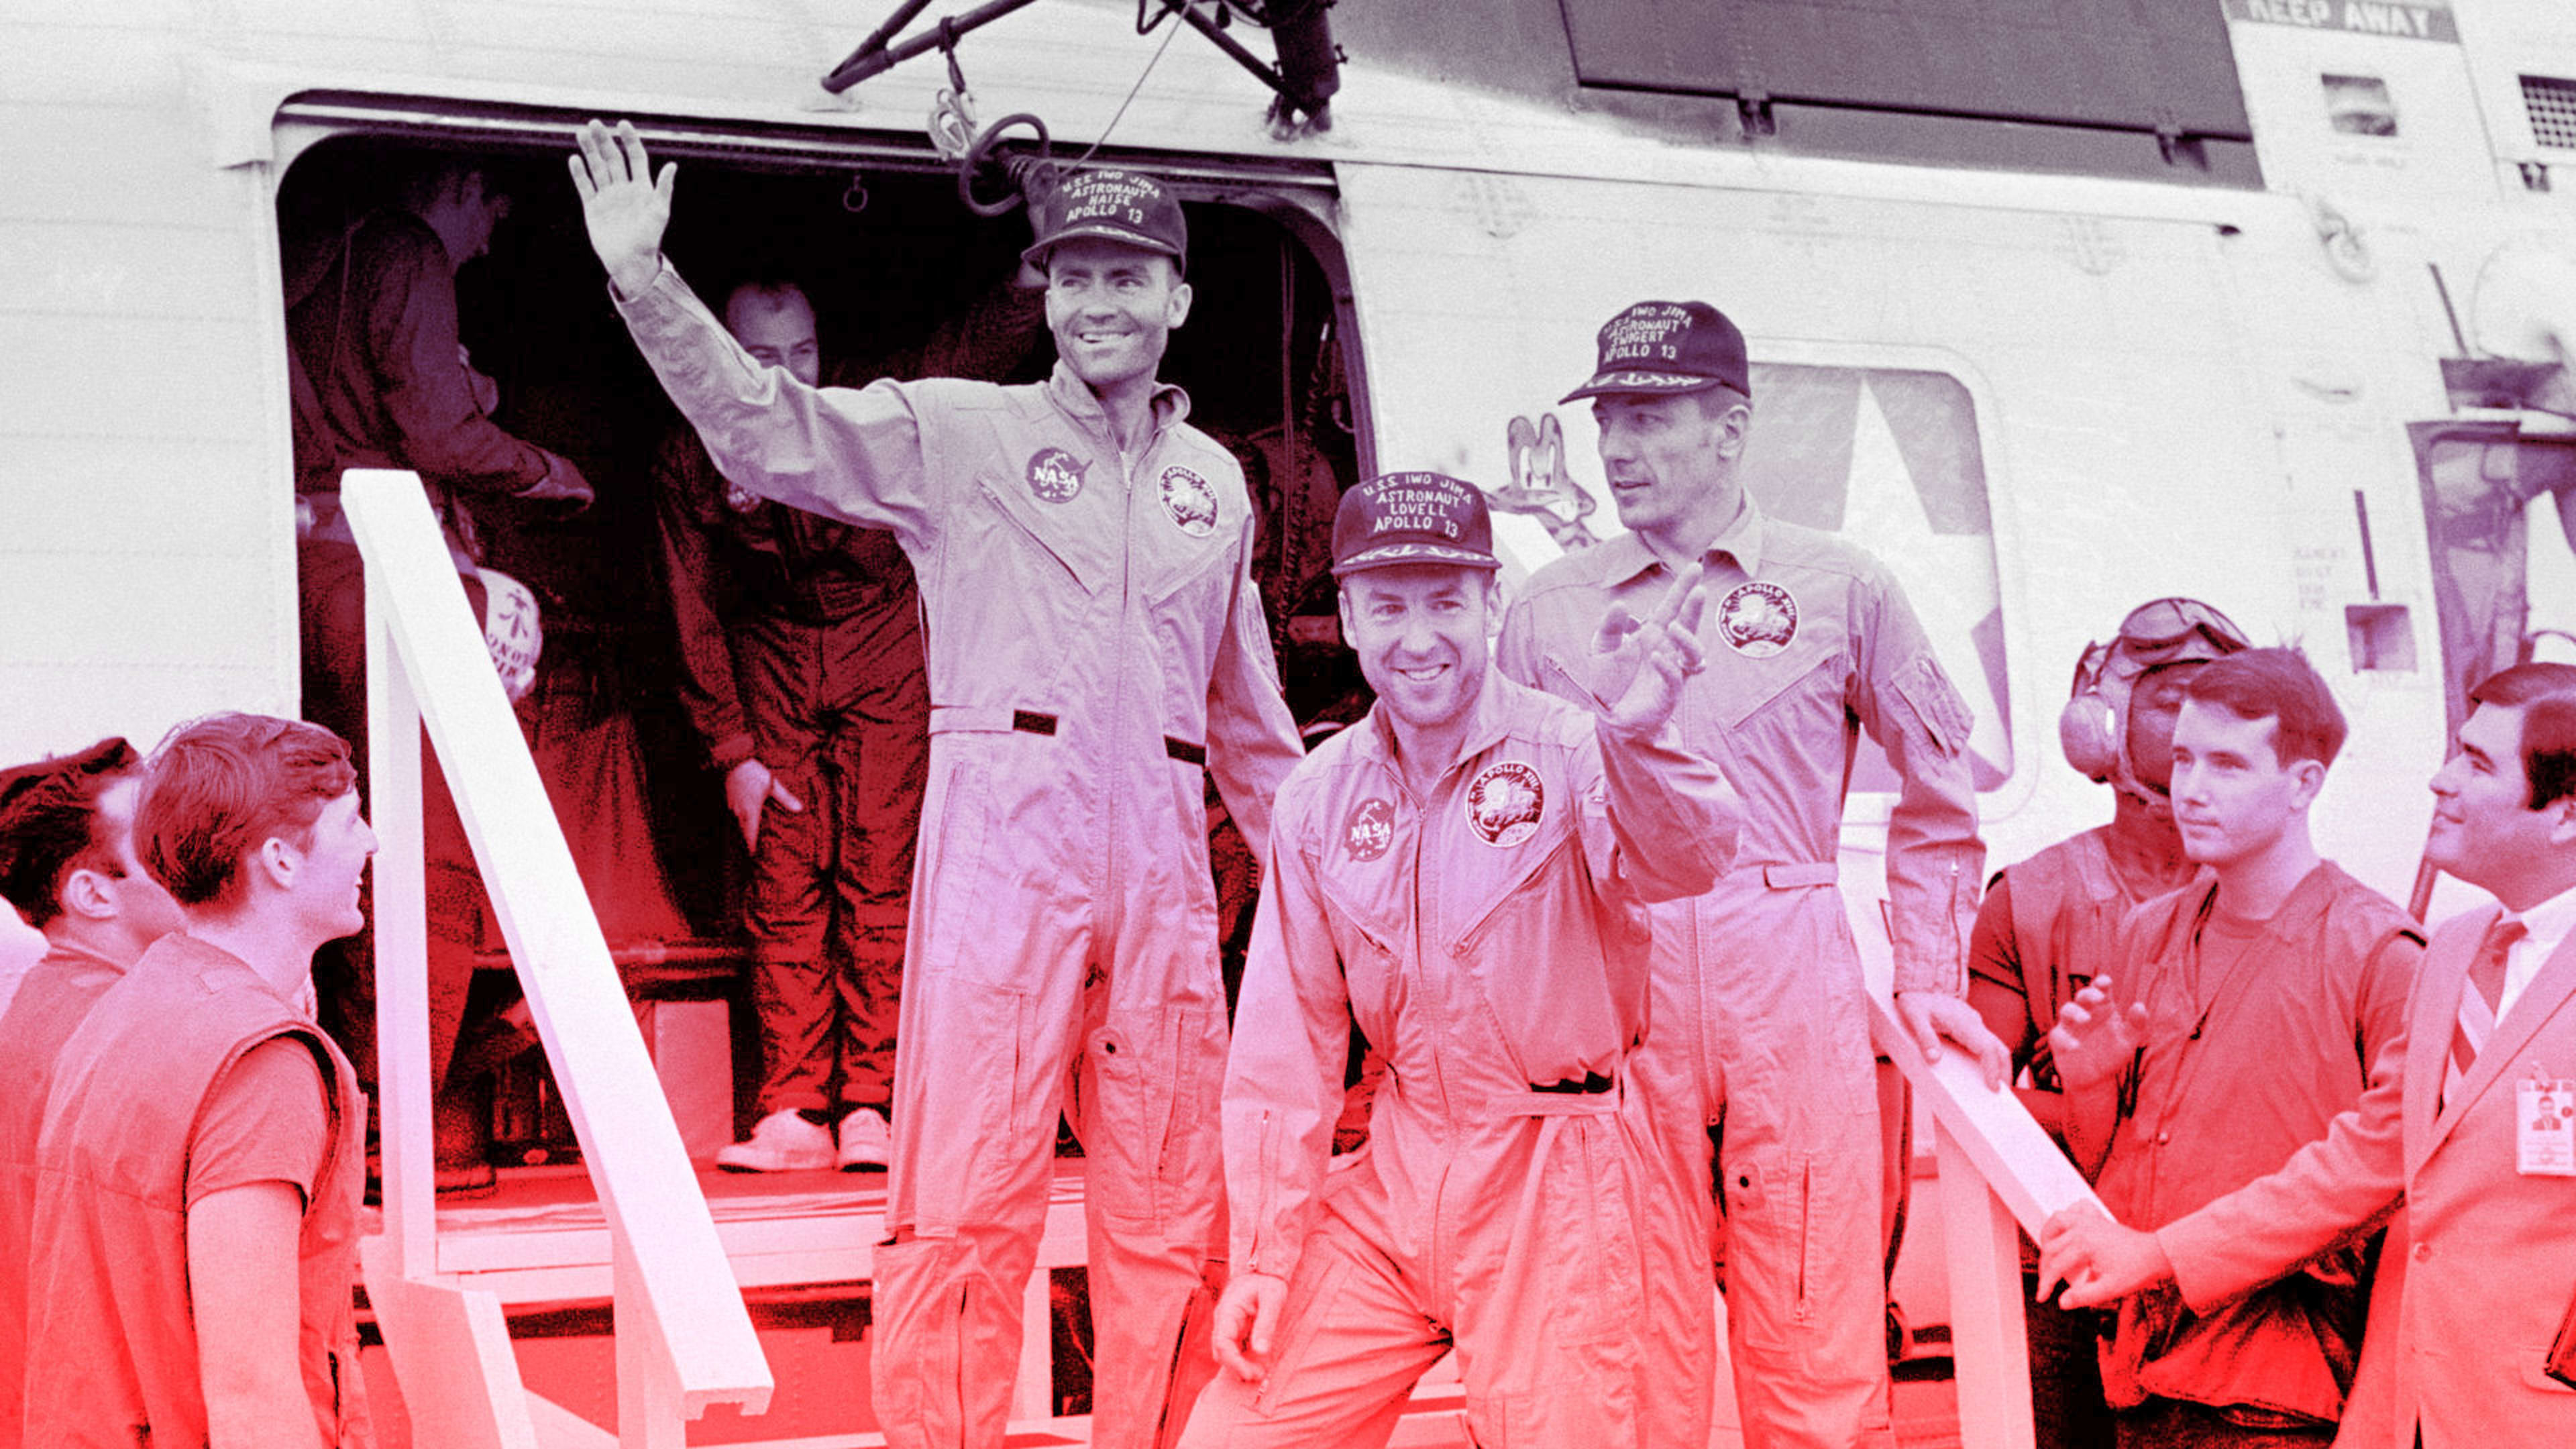 Fifty years later, Apollo 13 shows how leaders can navigate crises like COVID-19